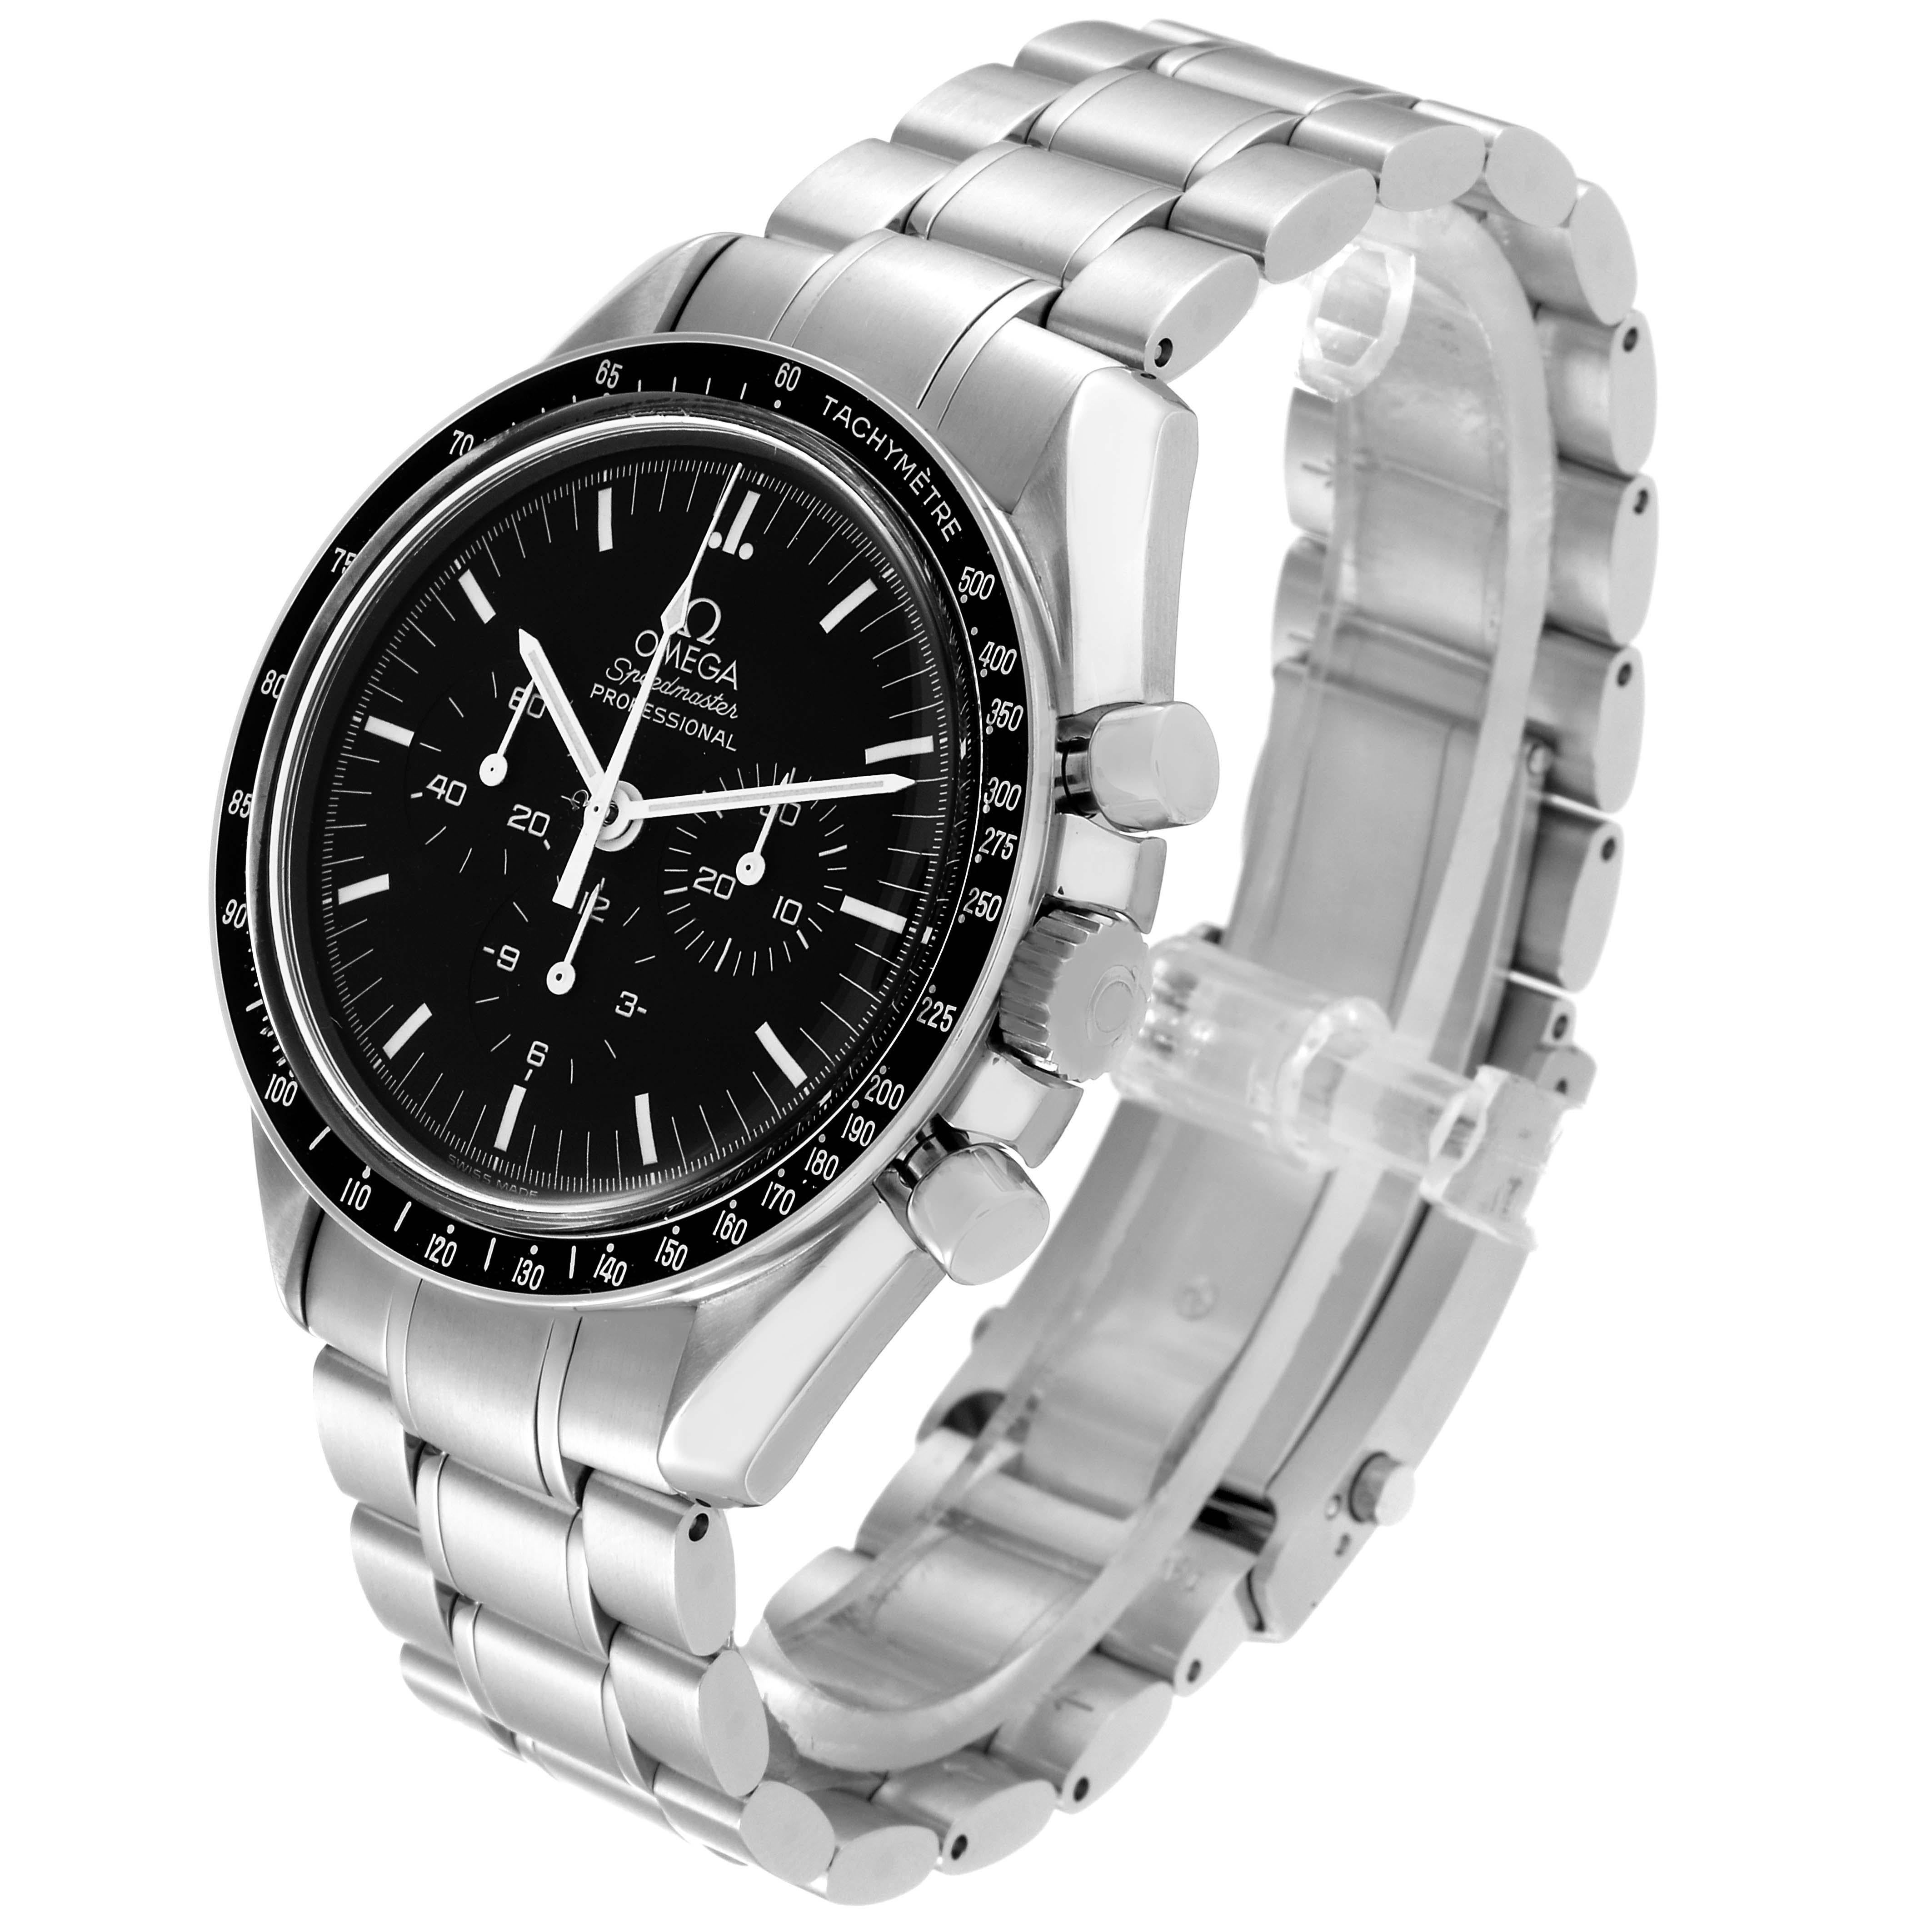 Omega Speedmaster MoonWatch Chronograph Steel Mens Watch 3570.50.00 Box Card For Sale 3